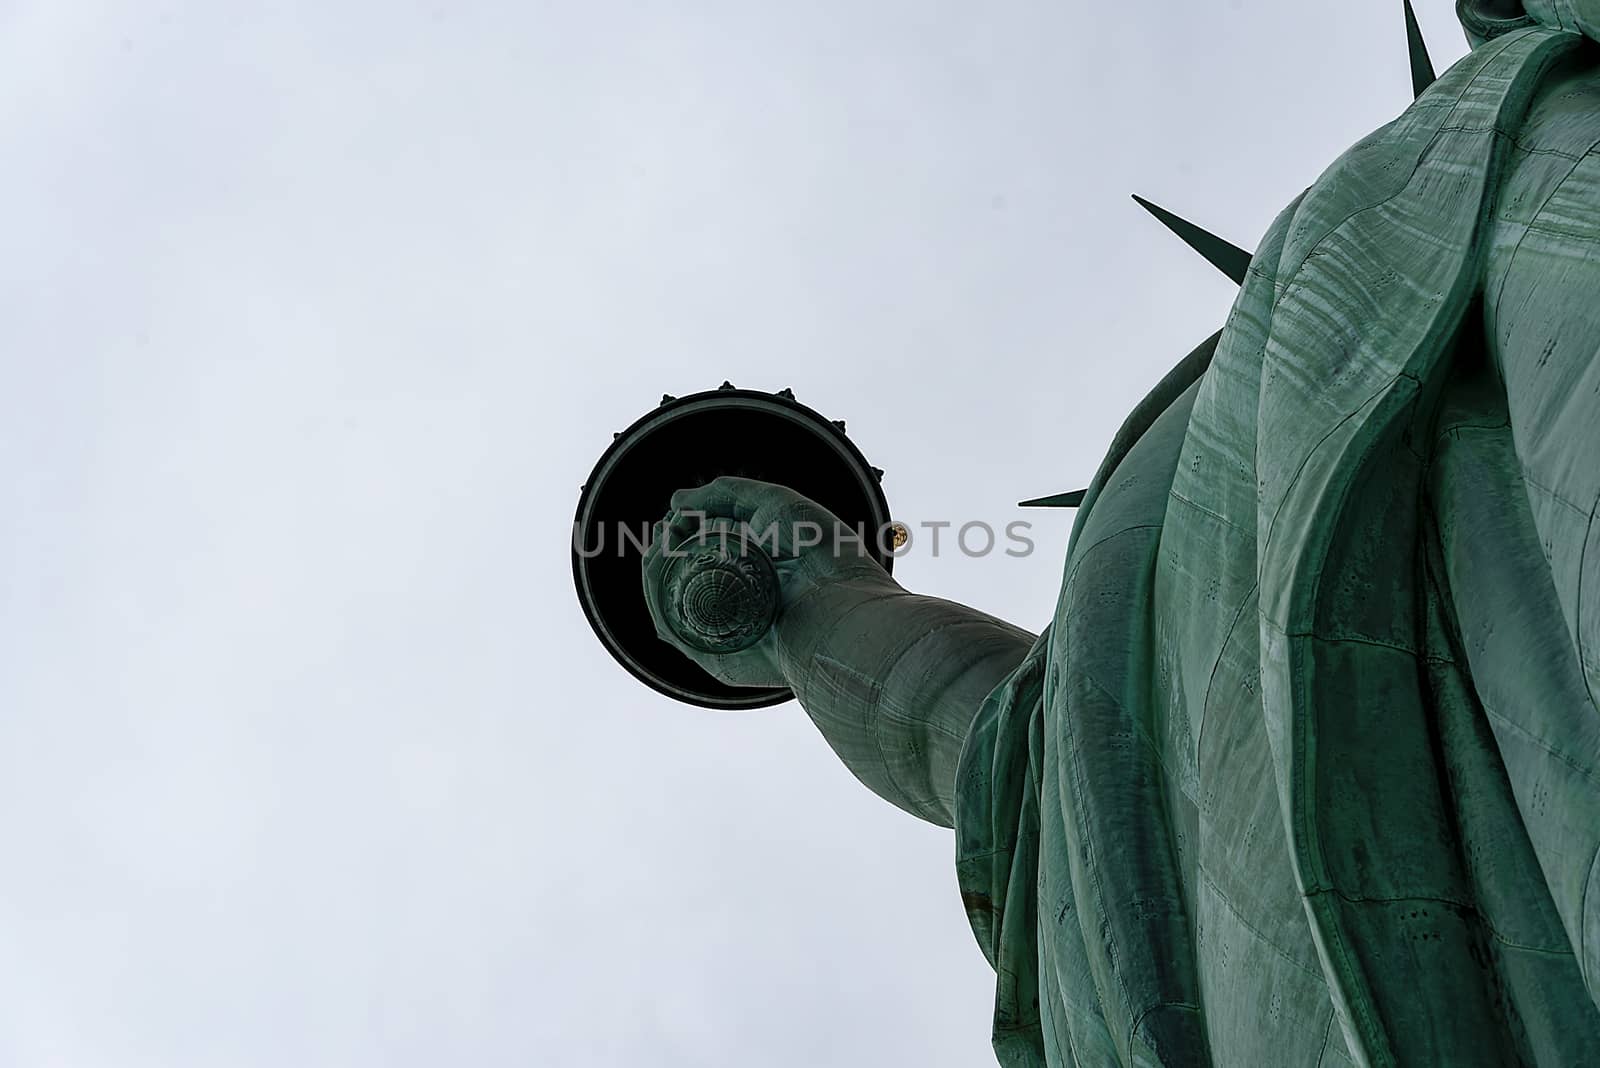 USA, New York - May 2019: Statue of Liberty, Liberty Island, torch from below